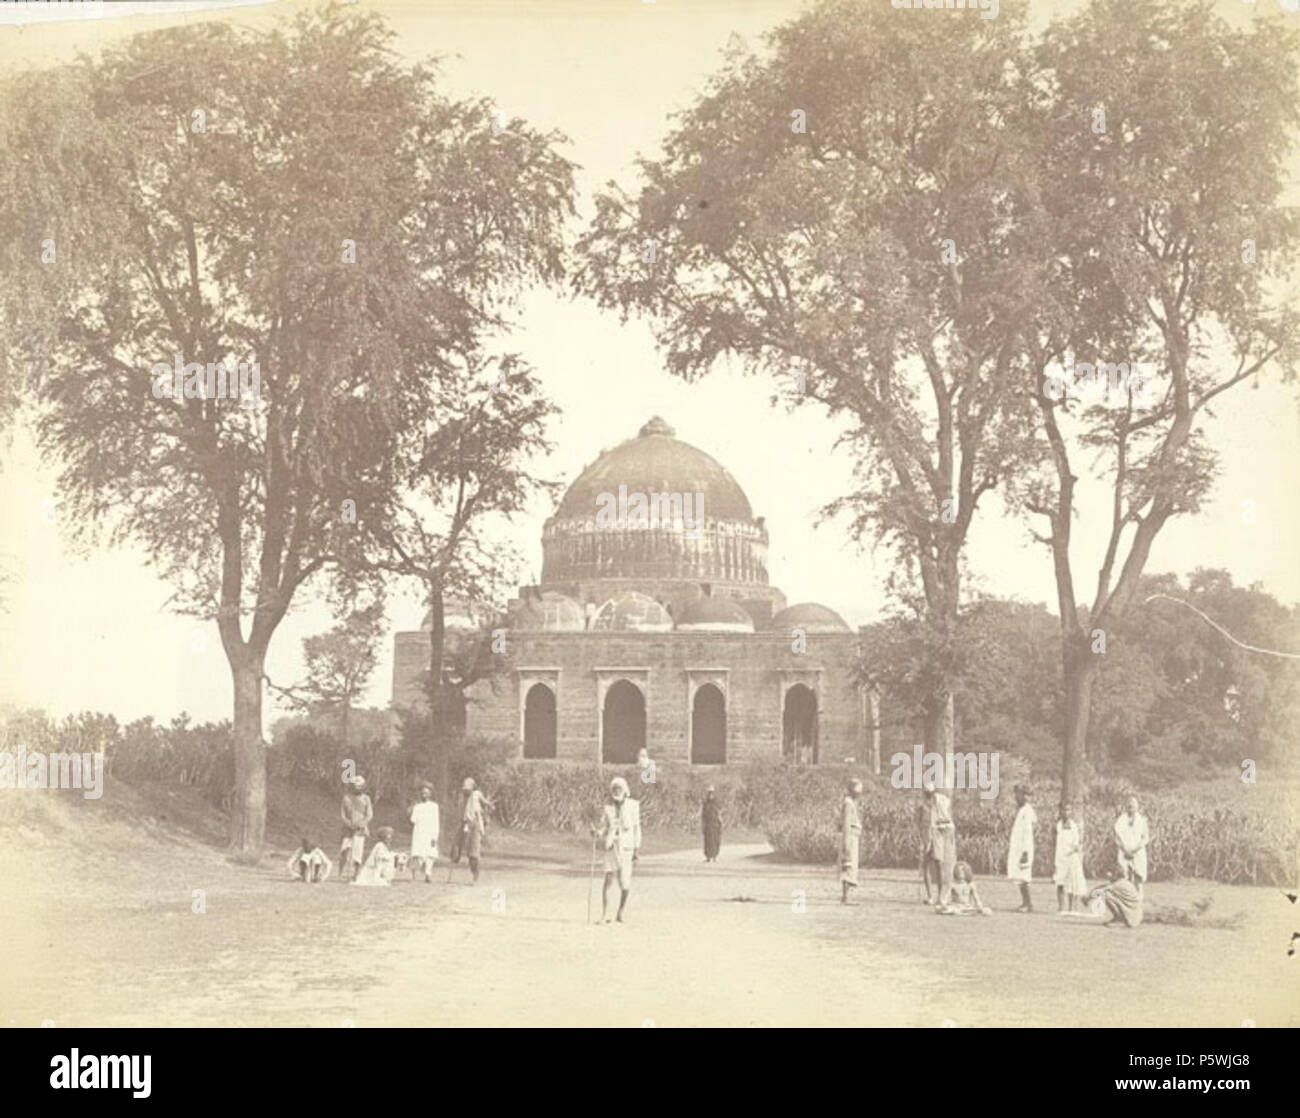 N/A. English: This signed photograph was taken by Charles Lickfold in 1880s. The image shows the tomb of Darya Khan, which now lies in the northern suburbs of modern-day Ahmadabad. It was built in 1453 whilst the city was the capital of the thriving sultanate of Gujarat. The majority of tombs of the period in Gujarat are built using local post and lintel or trabeate methods of construction in yellow sandstone. This tomb differs in two ways: first, it is built using baked brick; and secondly, its architects chose to use true arches and domes according to arcuate methods to create a cavernous in Stock Photo